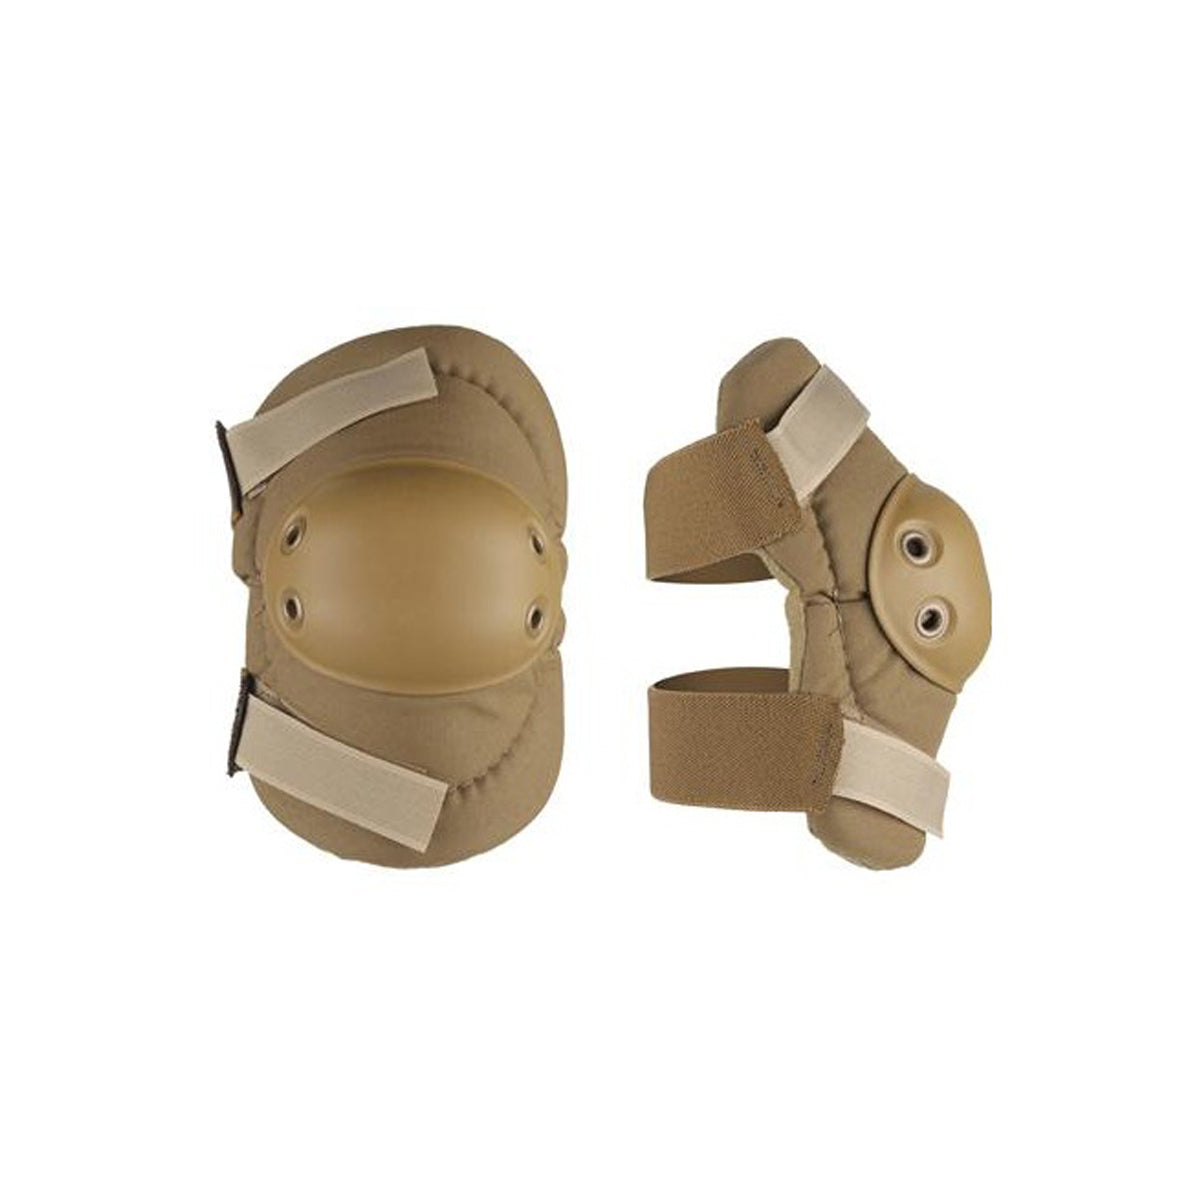 Flexible Tactical Elbow Pads, Coyote